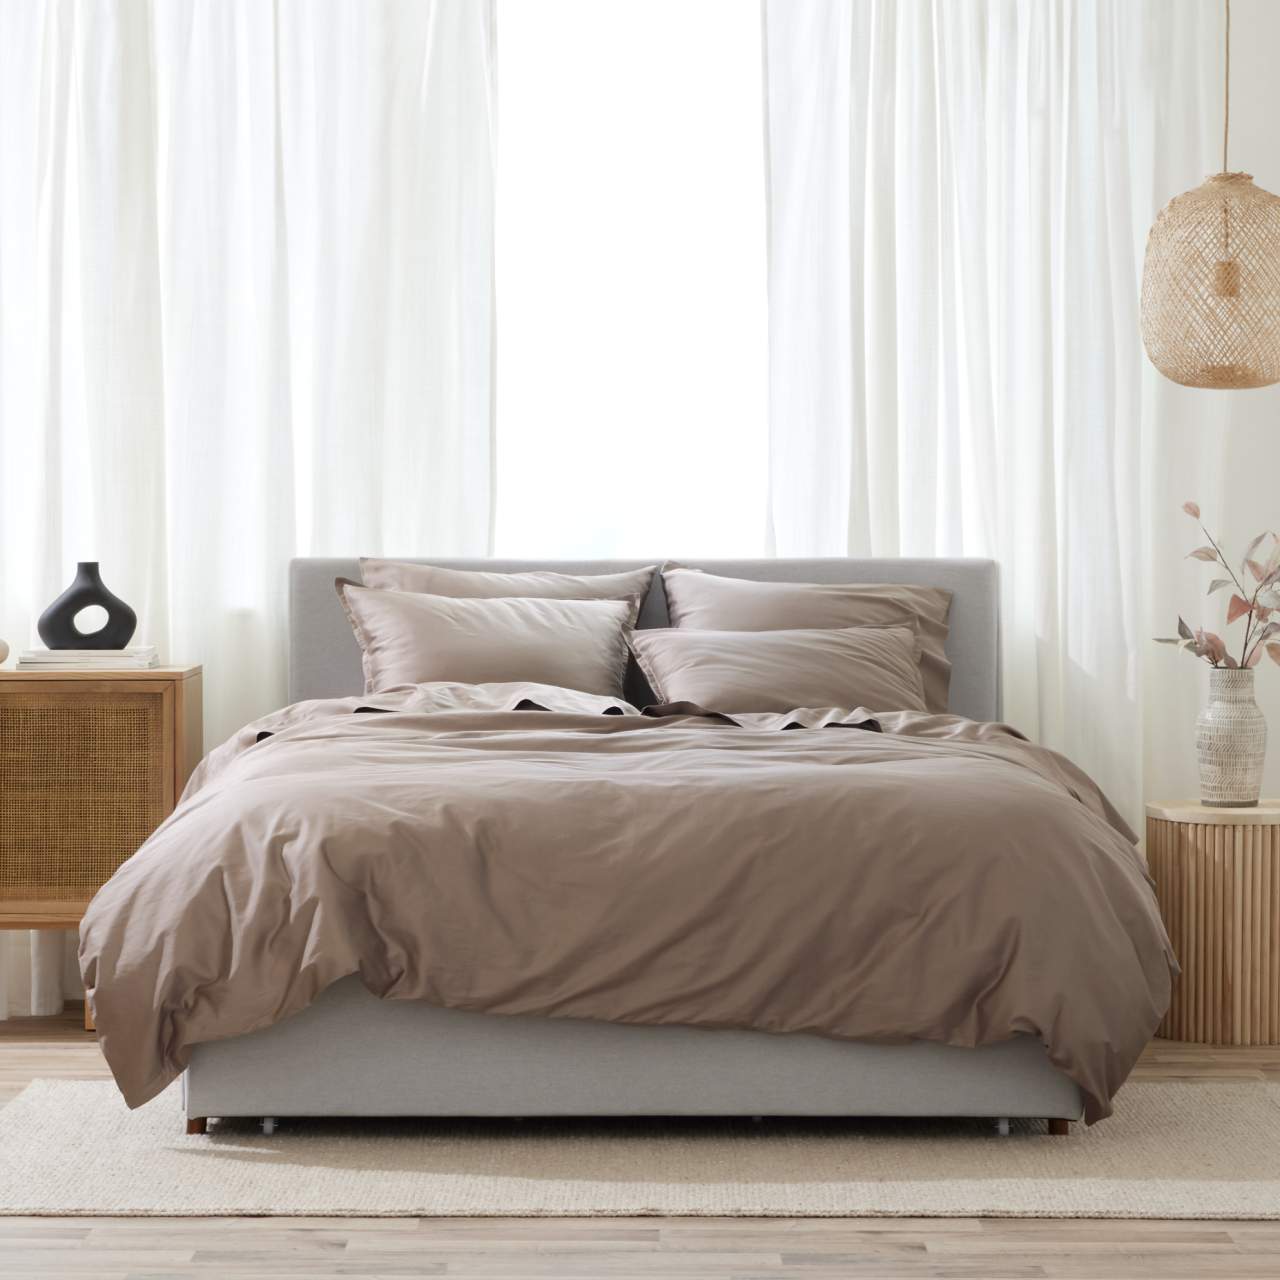 Are Egyptian Cotton Sheets the Best Option for Sensitive Skin?